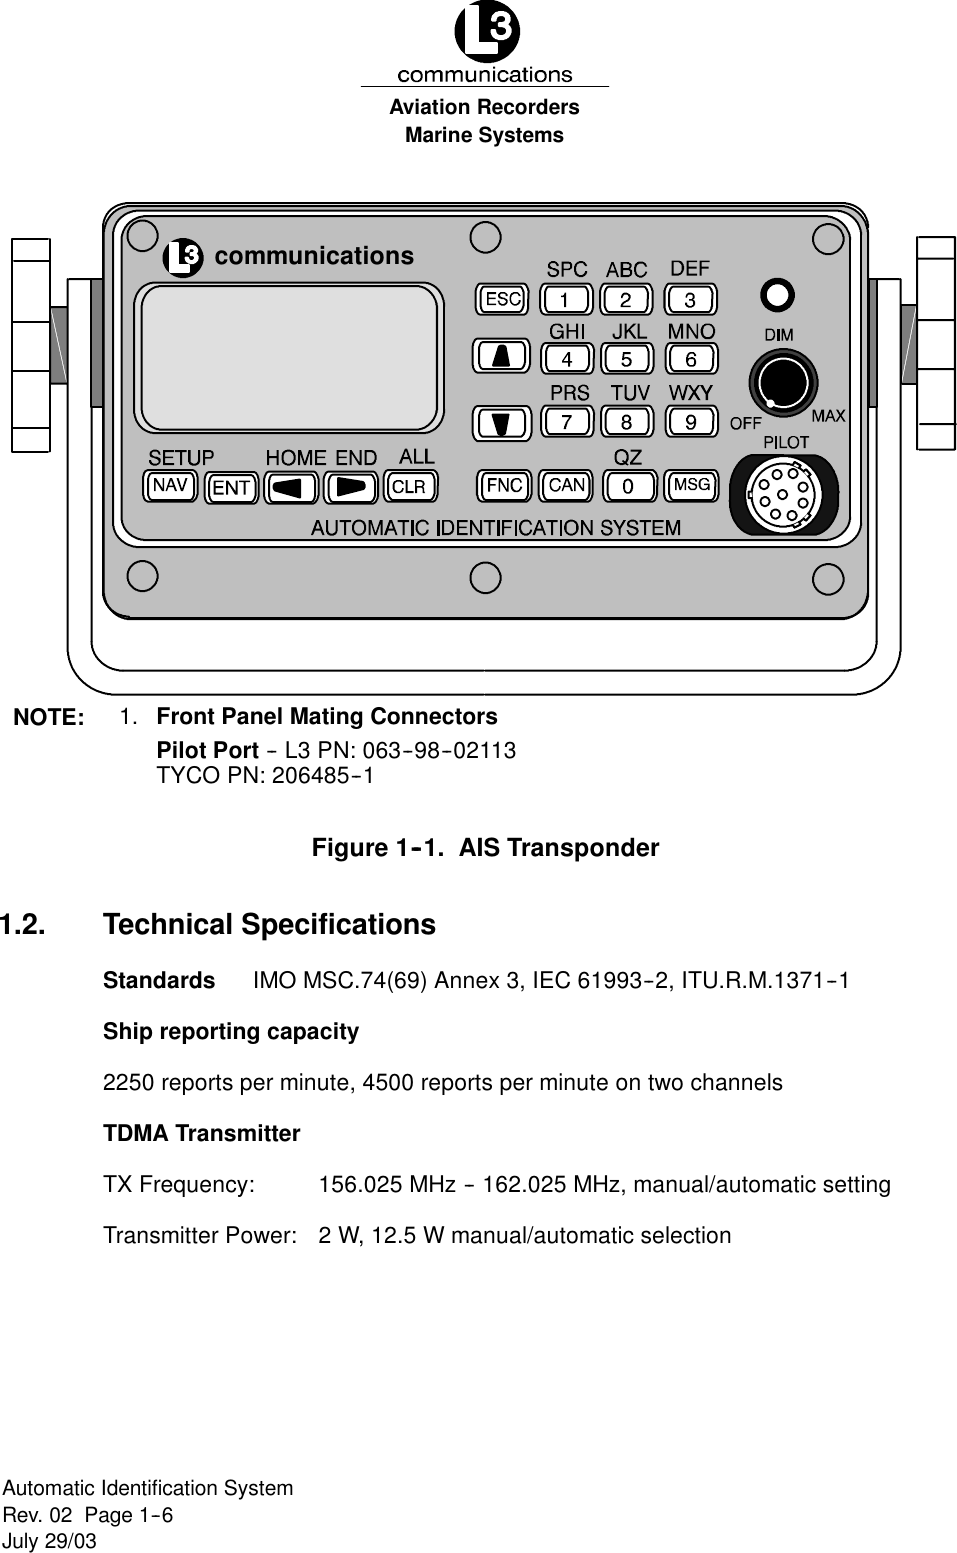 Marine SystemsAviation RecordersRev. 02 Page 1--6July 29/03Automatic Identification SystemNOTE: 1. Front Panel Mating ConnectorsPilot Port -- L3 PN: 063--98--02113TYCO PN: 206485--1communicationsFigure 1--1. AIS Transponder1.2. Technical SpecificationsStandards IMO MSC.74(69) Annex 3, IEC 61993--2, ITU.R.M.1371--1Ship reporting capacity2250 reports per minute, 4500 reports per minute on two channelsTDMA TransmitterTX Frequency: 156.025 MHz -- 162.025 MHz, manual/automatic settingTransmitter Power: 2 W, 12.5 W manual/automatic selection